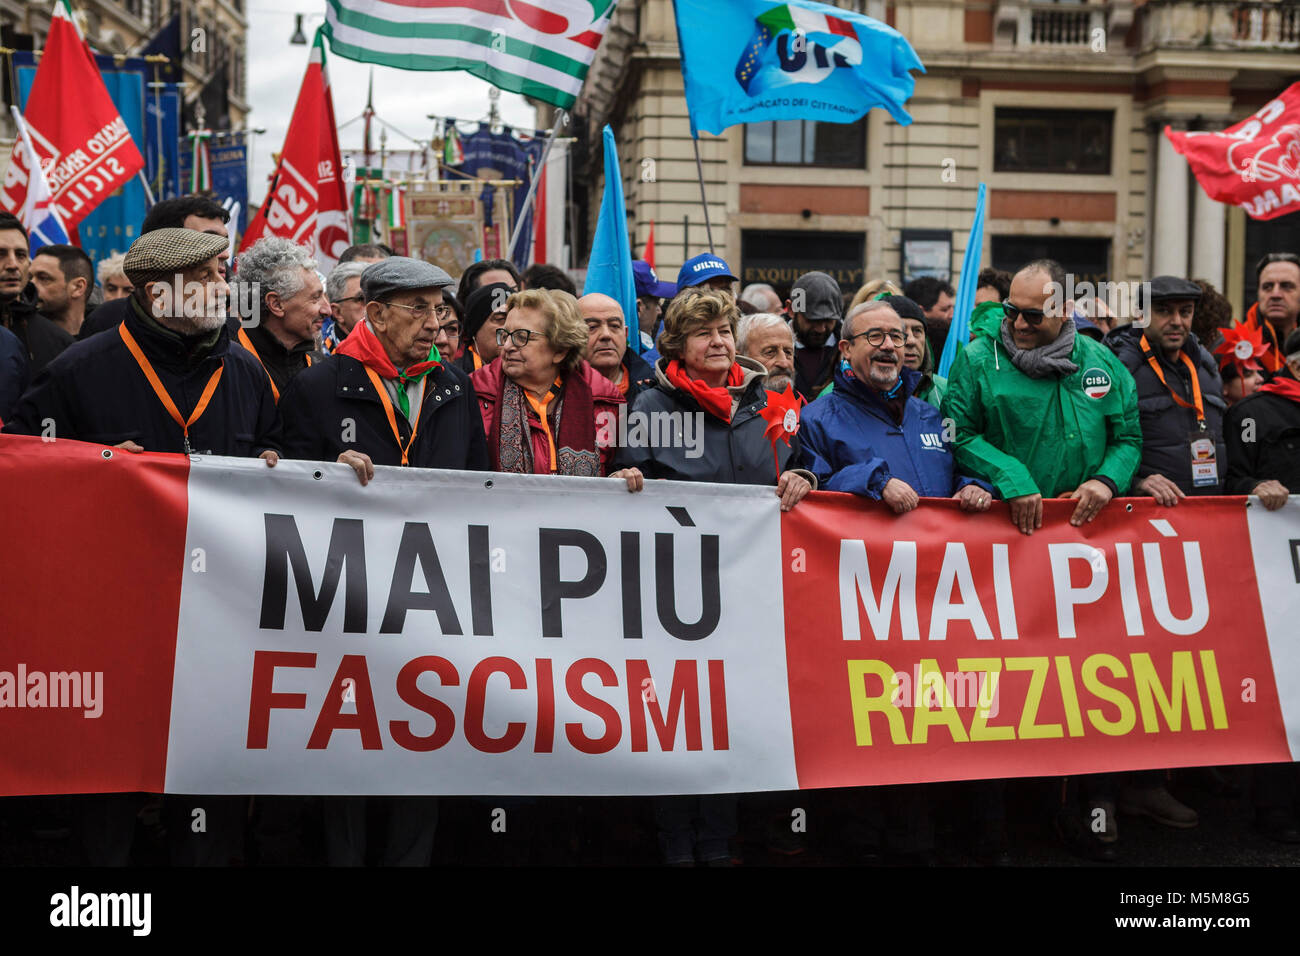 Rome, Italy. 24th February, 2018. Thousands of anti-fascist protesters took to the streets, during a demonstration organised by the National Association of Italian Partisans (ANPI), to rally against racism, after a far-right extremist in Macerata targeted African citizens in a racially motivated attack. Credit: Giuseppe Ciccia/Alamy Live News Stock Photo